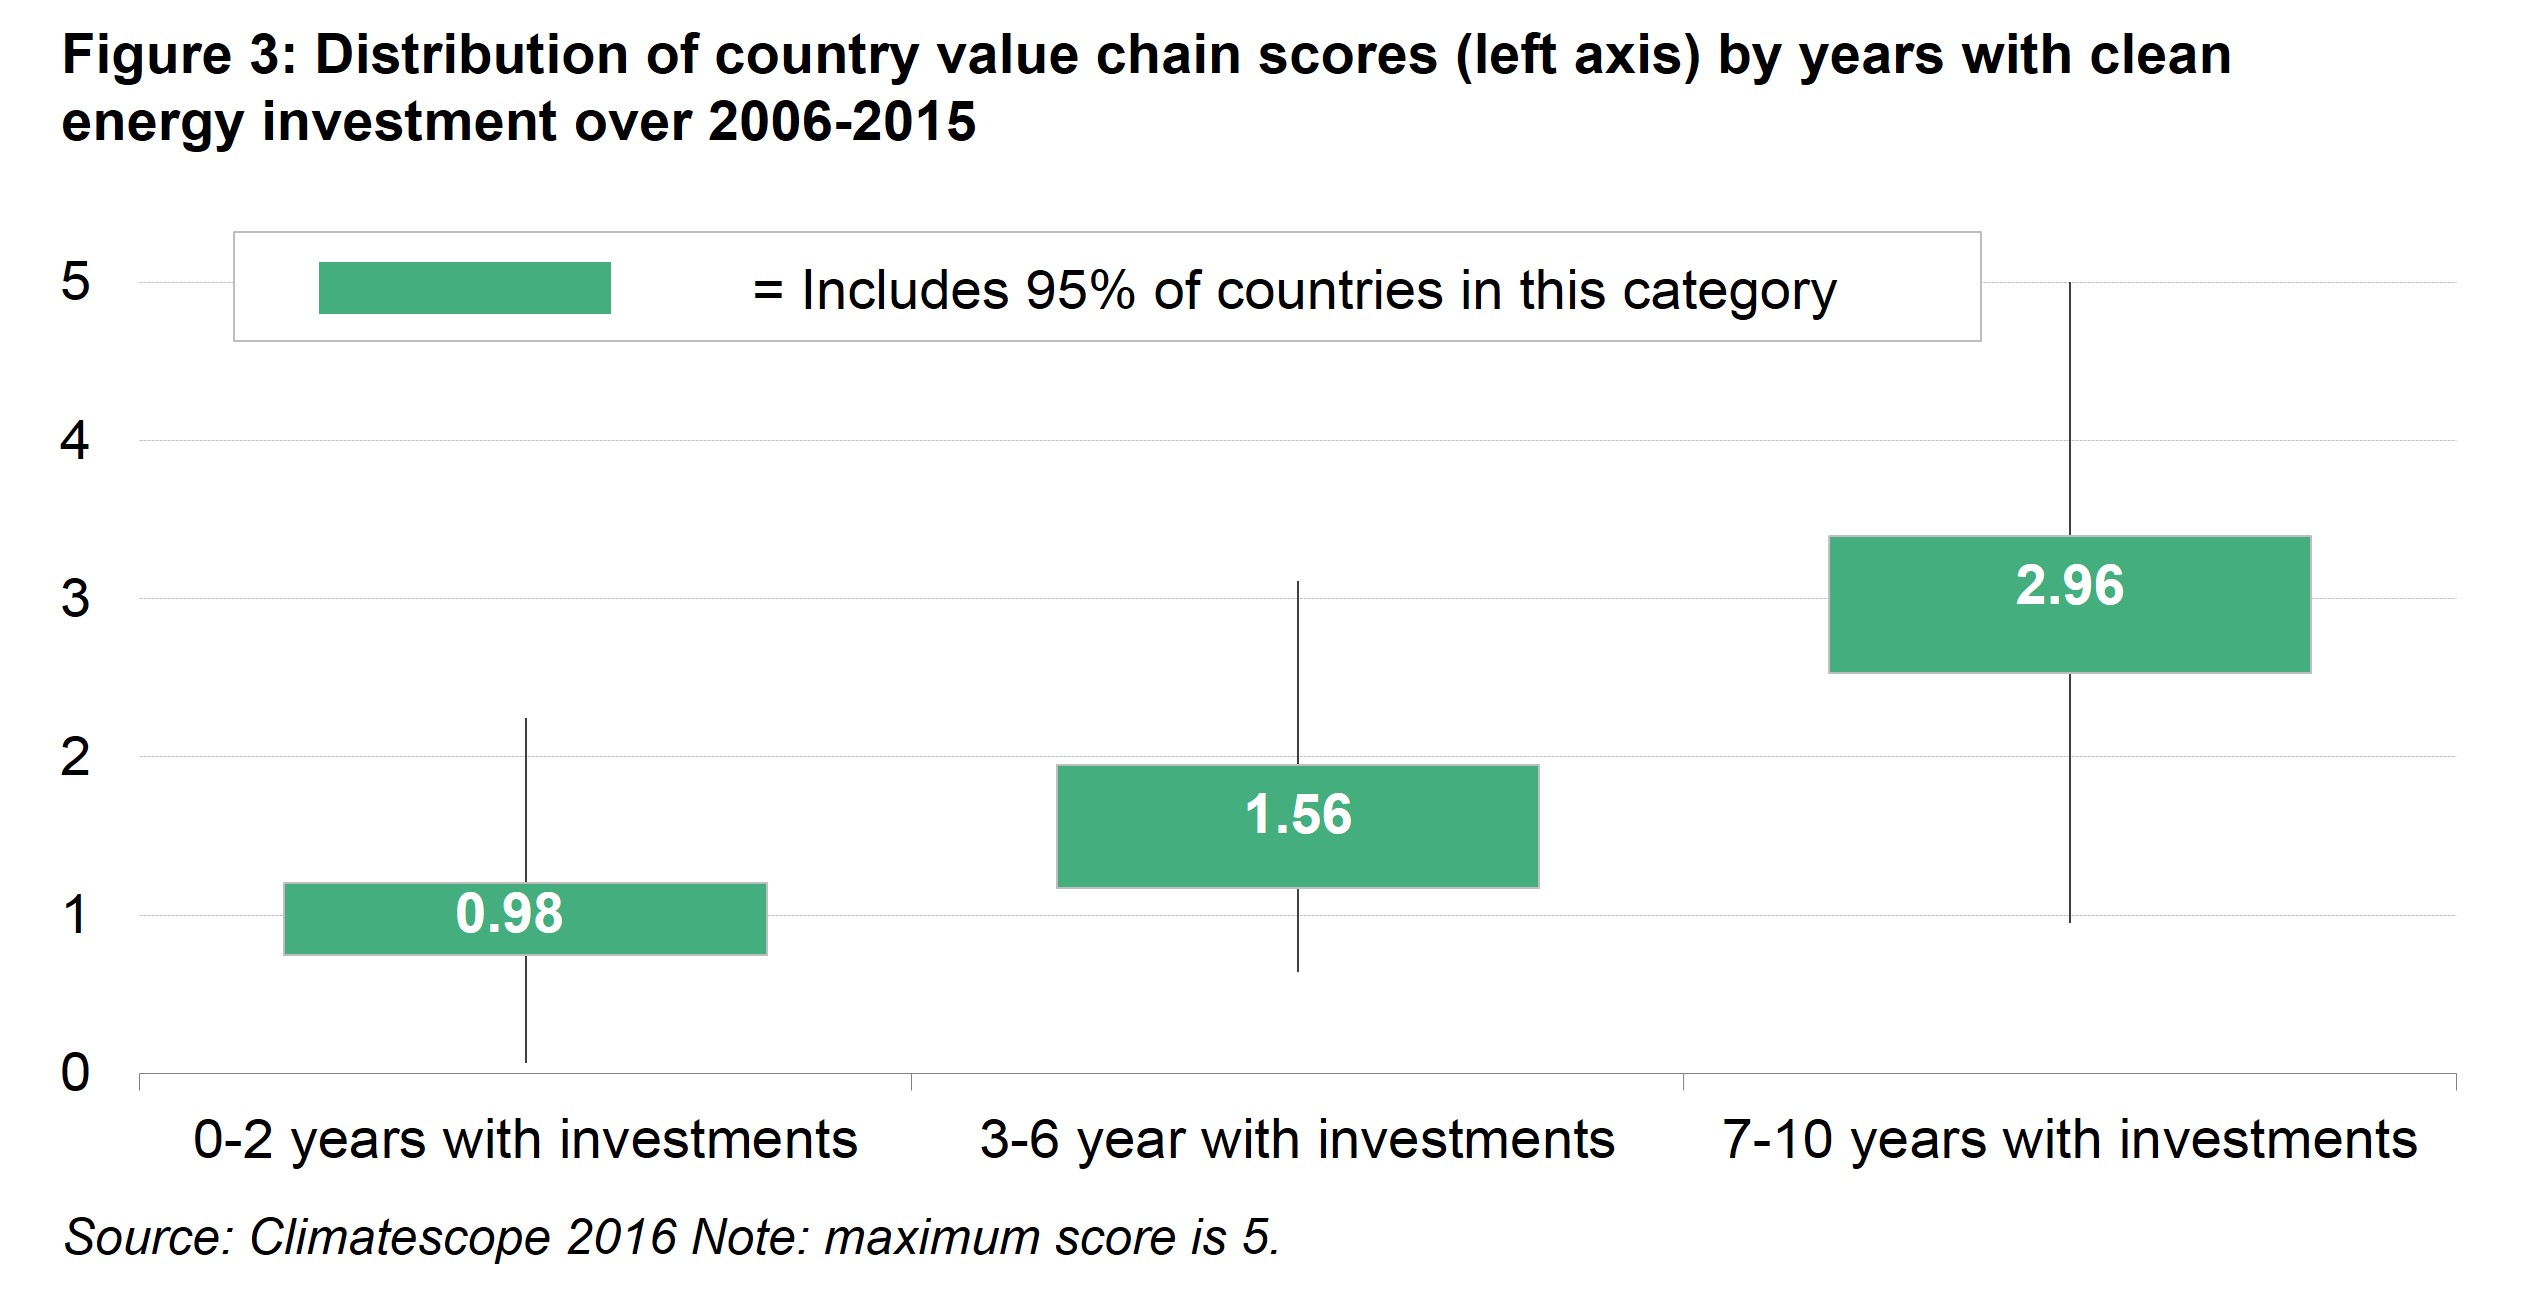 PIII Fig 3 - Distribution of country value chain scores (left axis) by years with clean energy investment over 2006-2015 